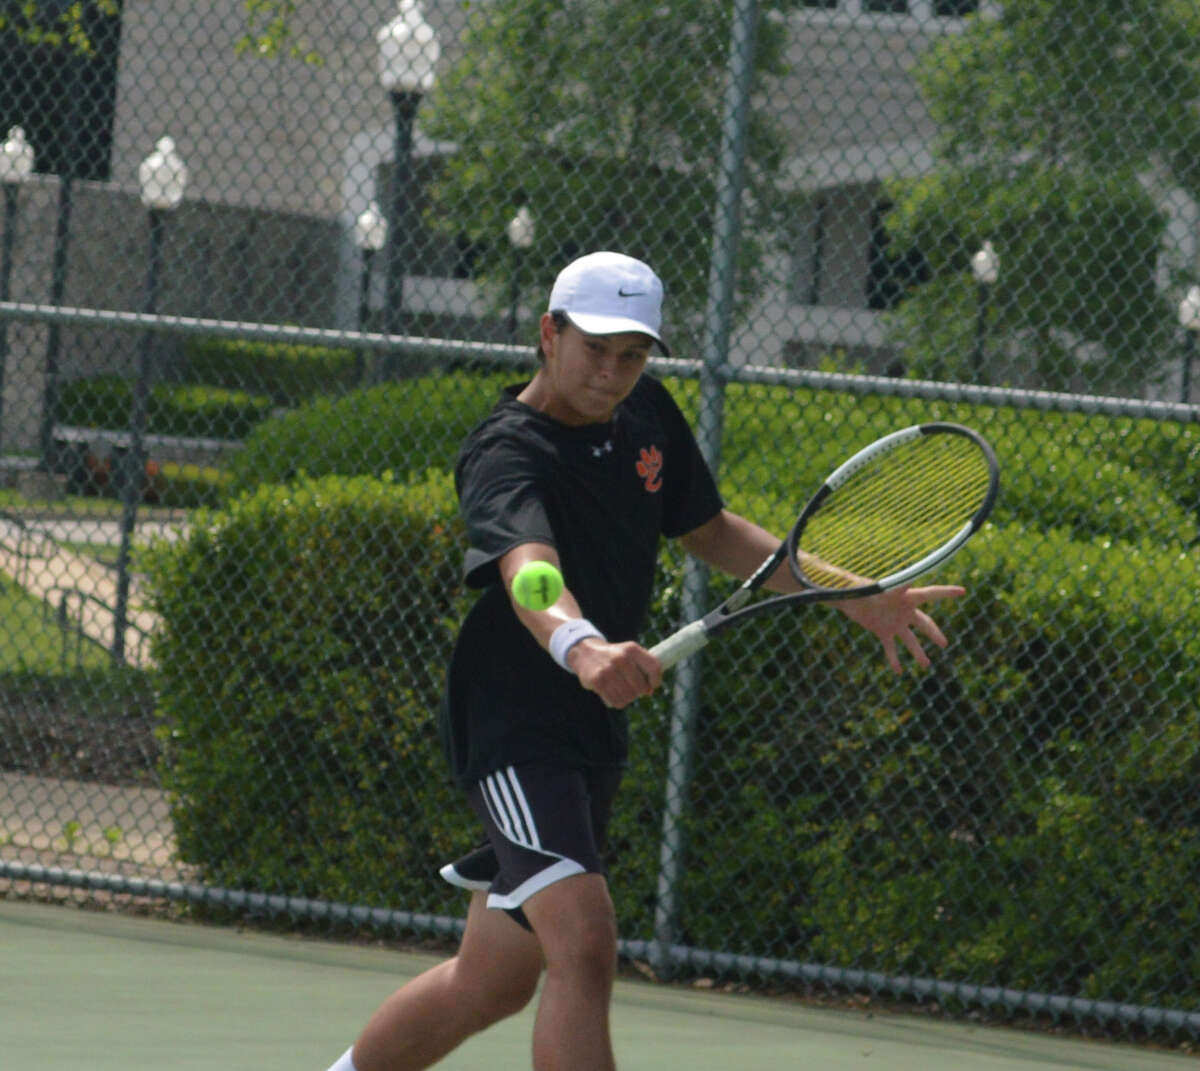 Jesse Hattrup at the Southwestern Conference tournament at the Andy Simpson Tennis Complex on the campus of Lewis and Clark Community College.